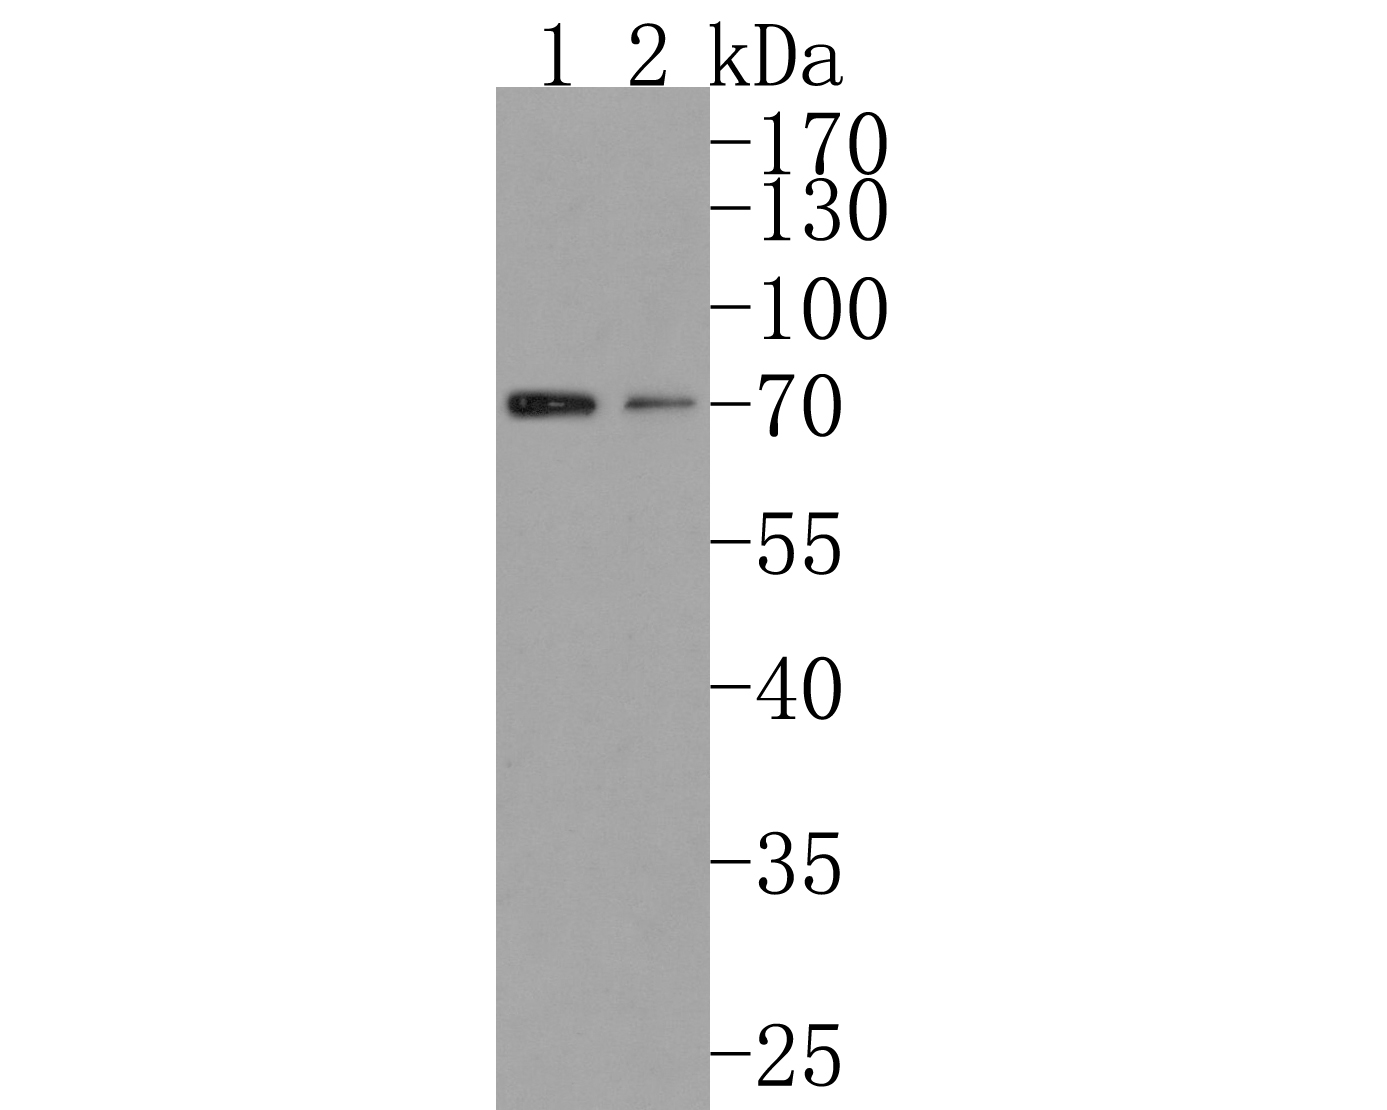 Western blot analysis of CYP1B1 on different lysates. Proteins were transferred to a PVDF membrane and blocked with 5% BSA in PBS for 1 hour at room temperature. The primary antibody (HA500494, 1/500) was used in 5% BSA at room temperature for 2 hours. Goat Anti-Rabbit IgG - HRP Secondary Antibody (HA1001) at 1:200,000 dilution was used for 1 hour at room temperature.<br />
Positive control: <br />
Lane 1: A549 cell lysate<br />
Lane 2: Hela cell lysate